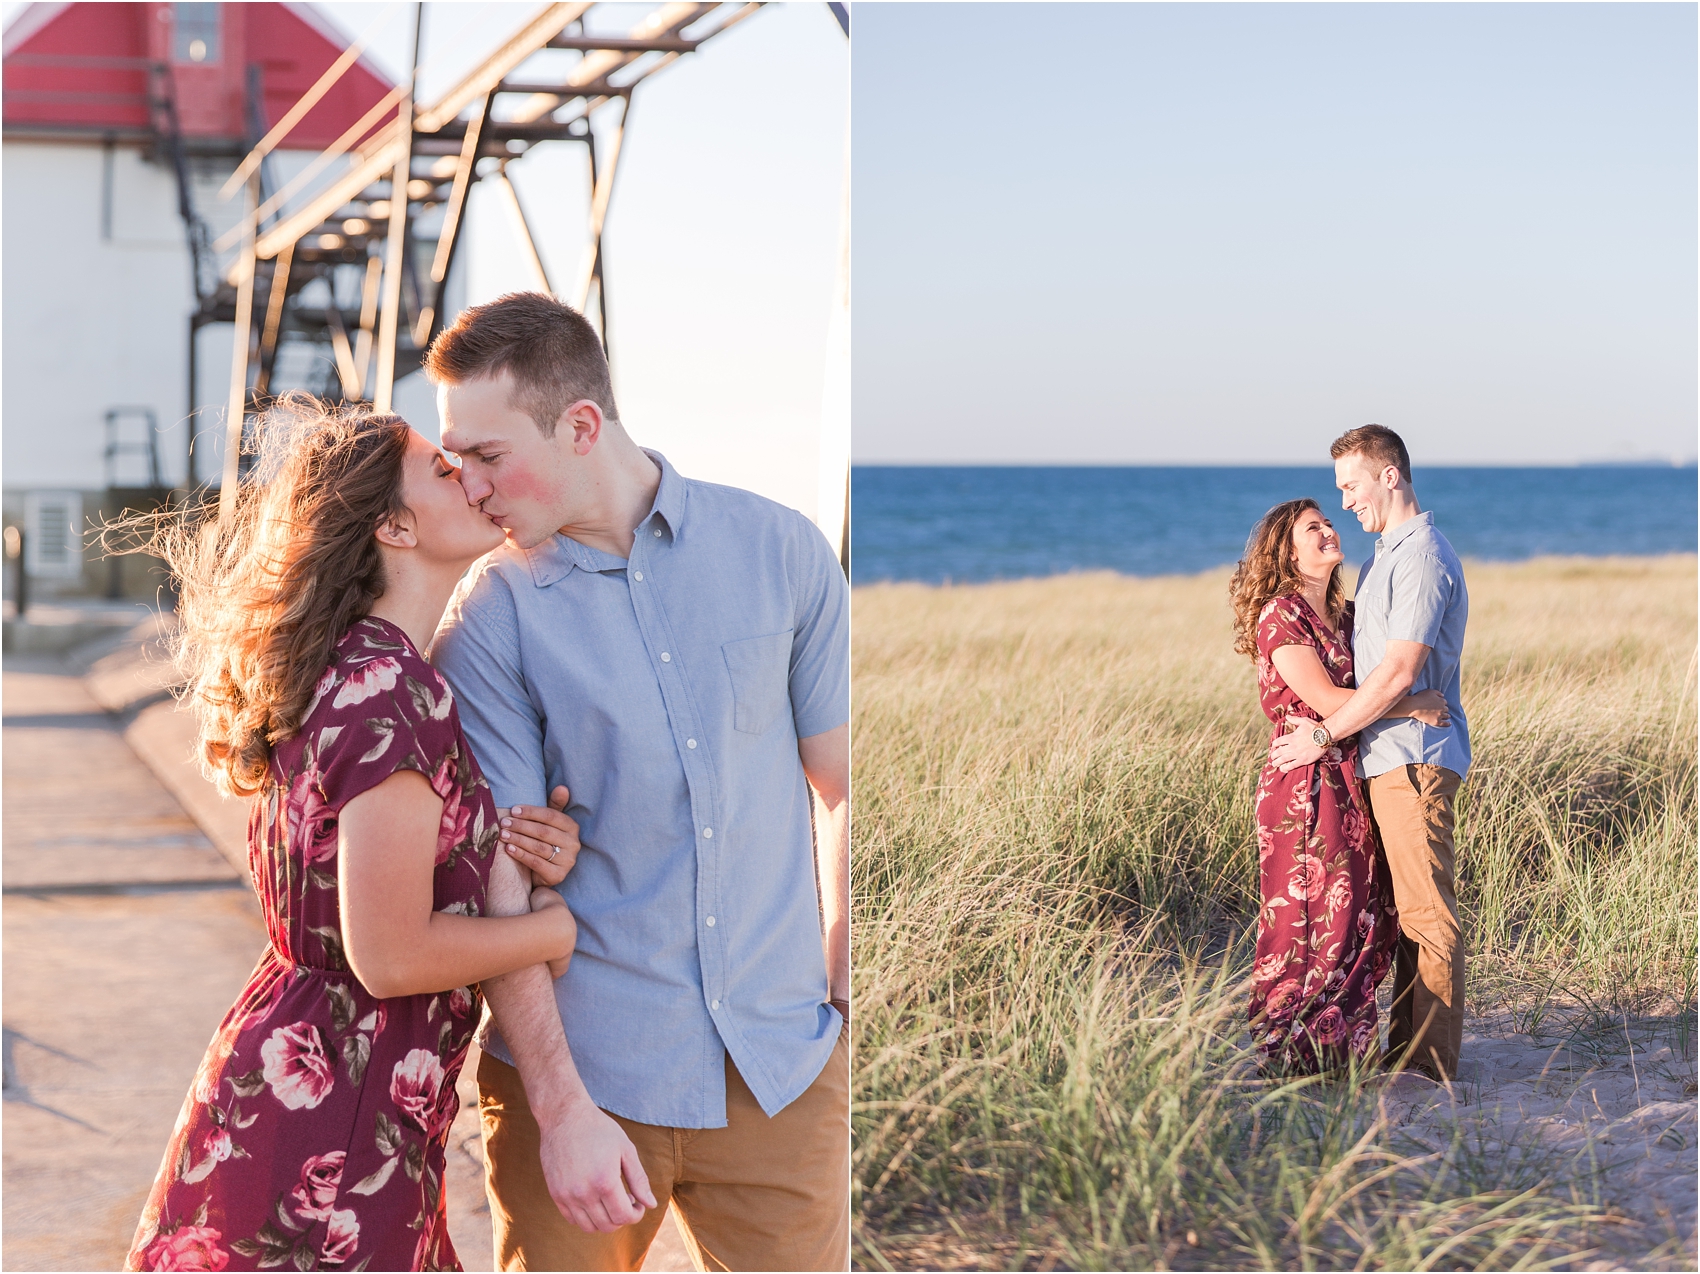 candid-end-of-summer-sunset-engagement-photos-at-silver-beach-in-st-joseph-mi-by-courtney-carolyn-photography_0004.jpg